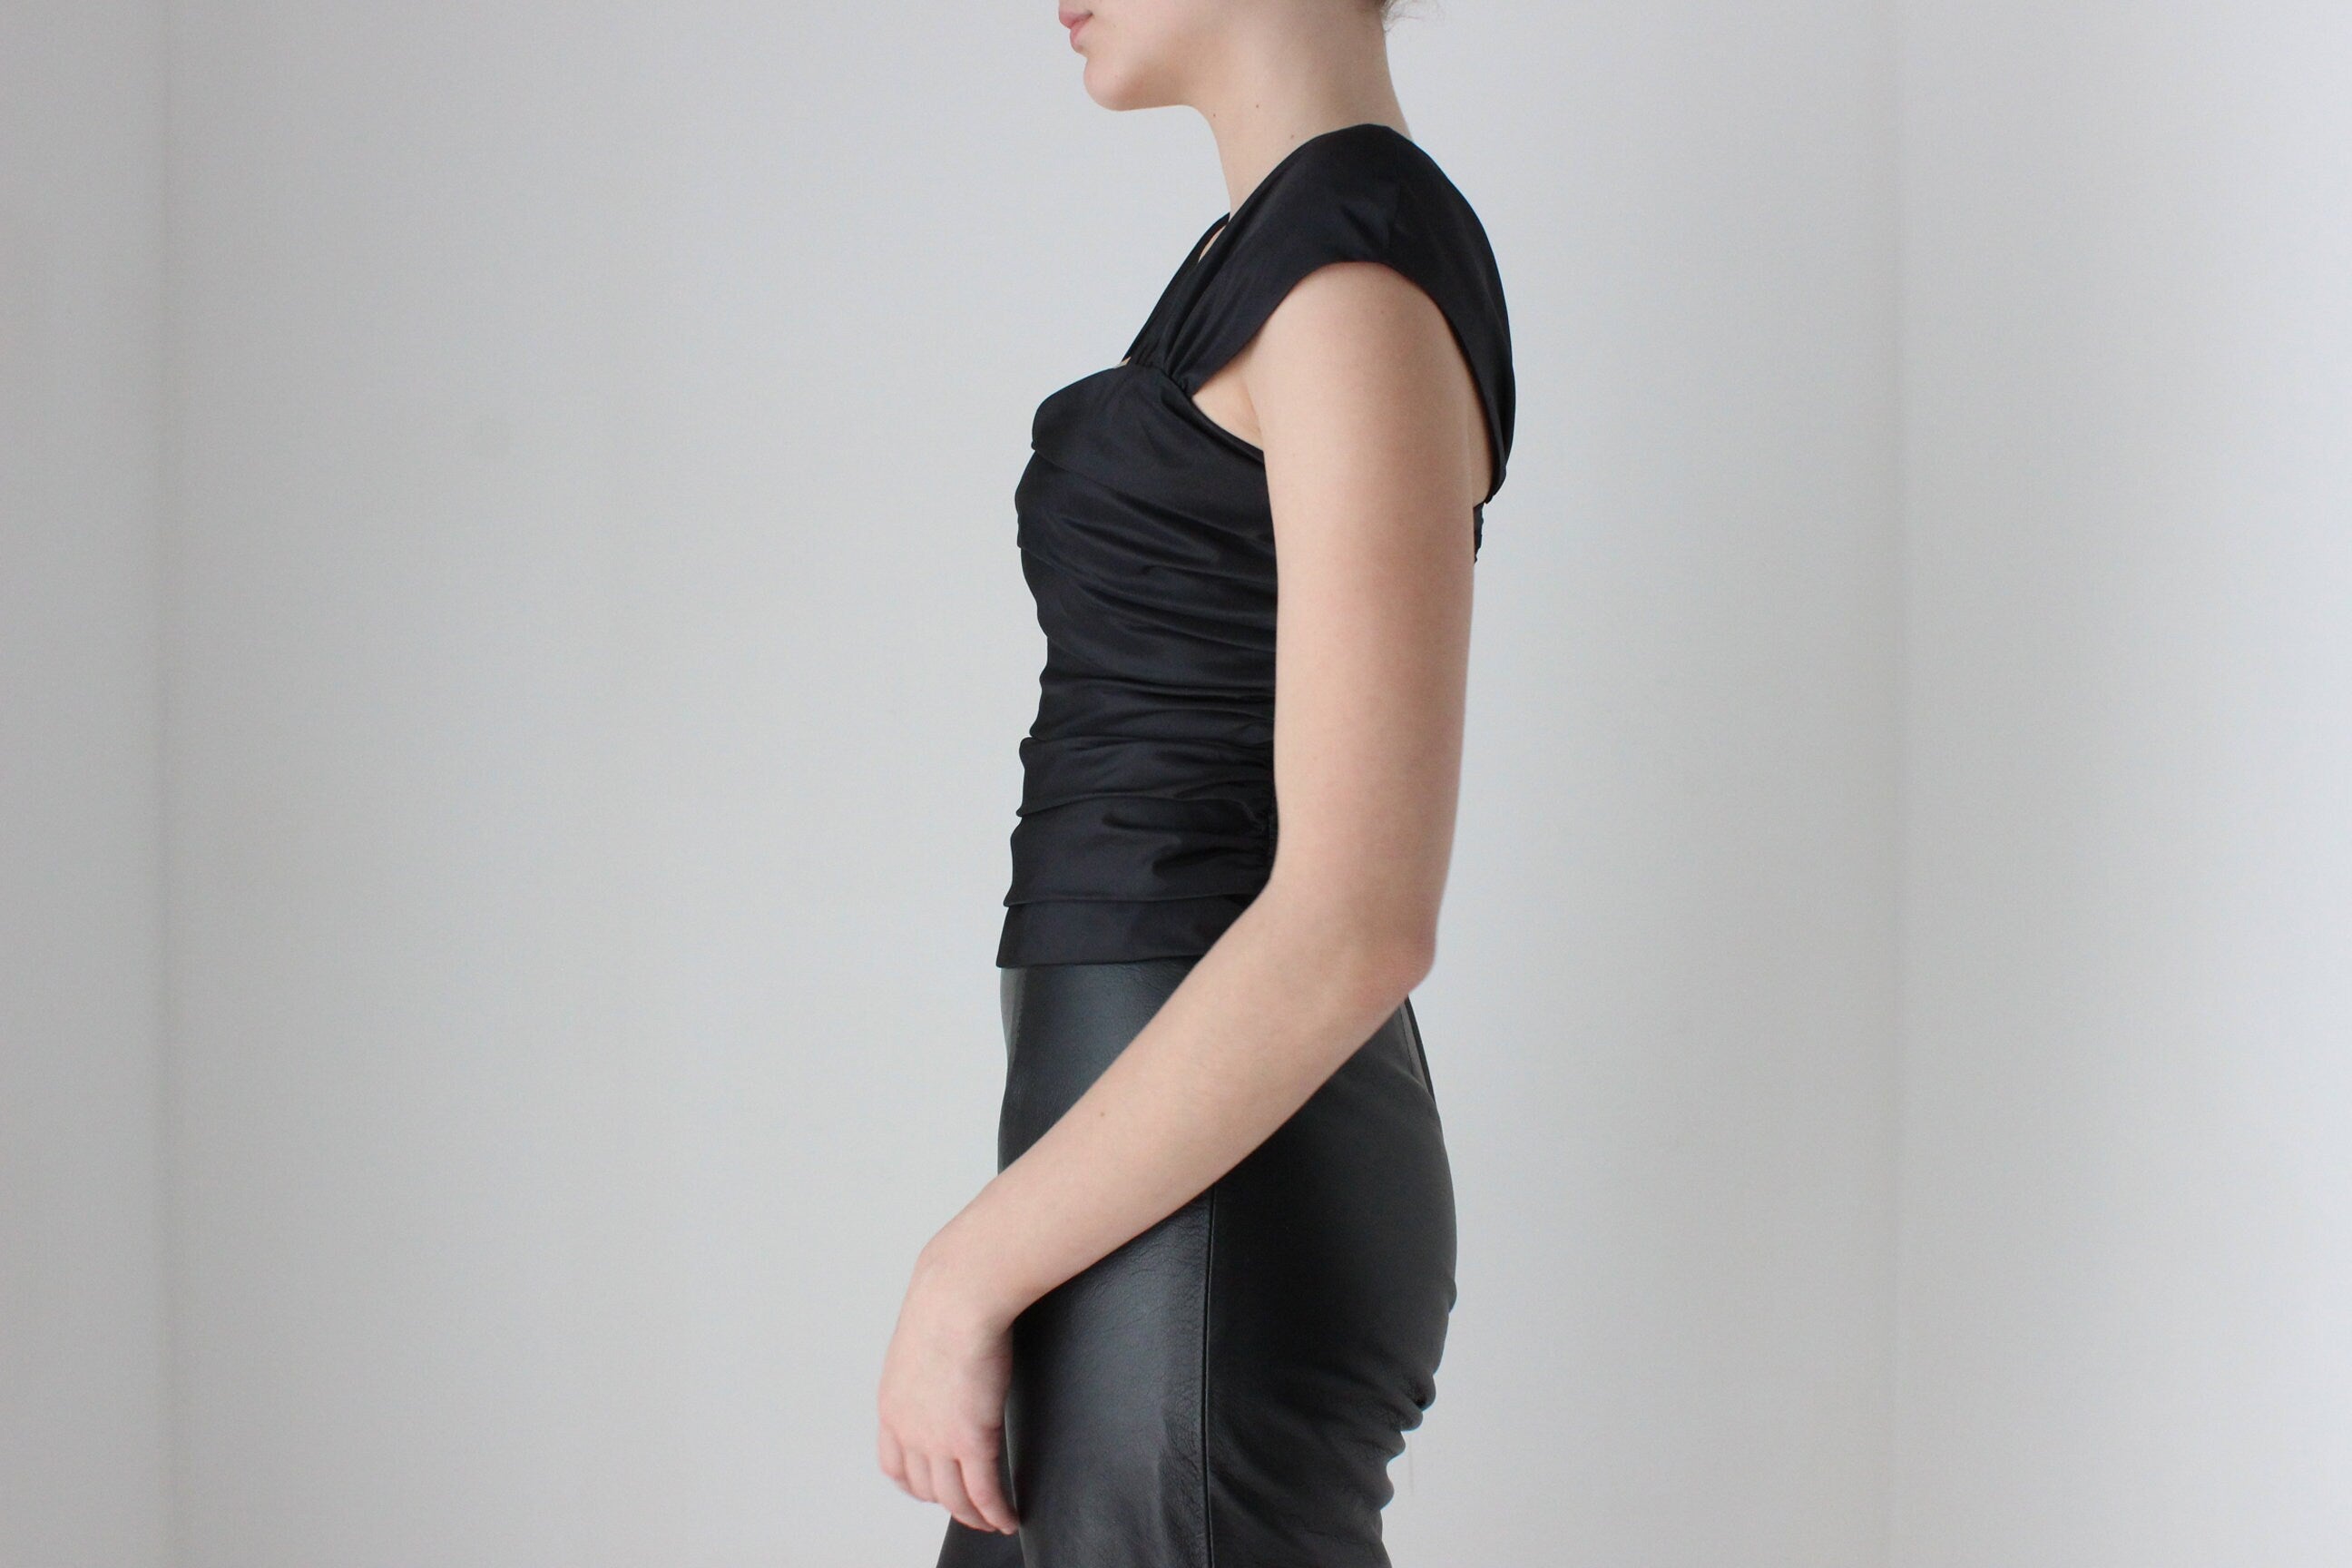 BALLETCORE 80s Taffeta Ruched Fitted Origami Corset Top